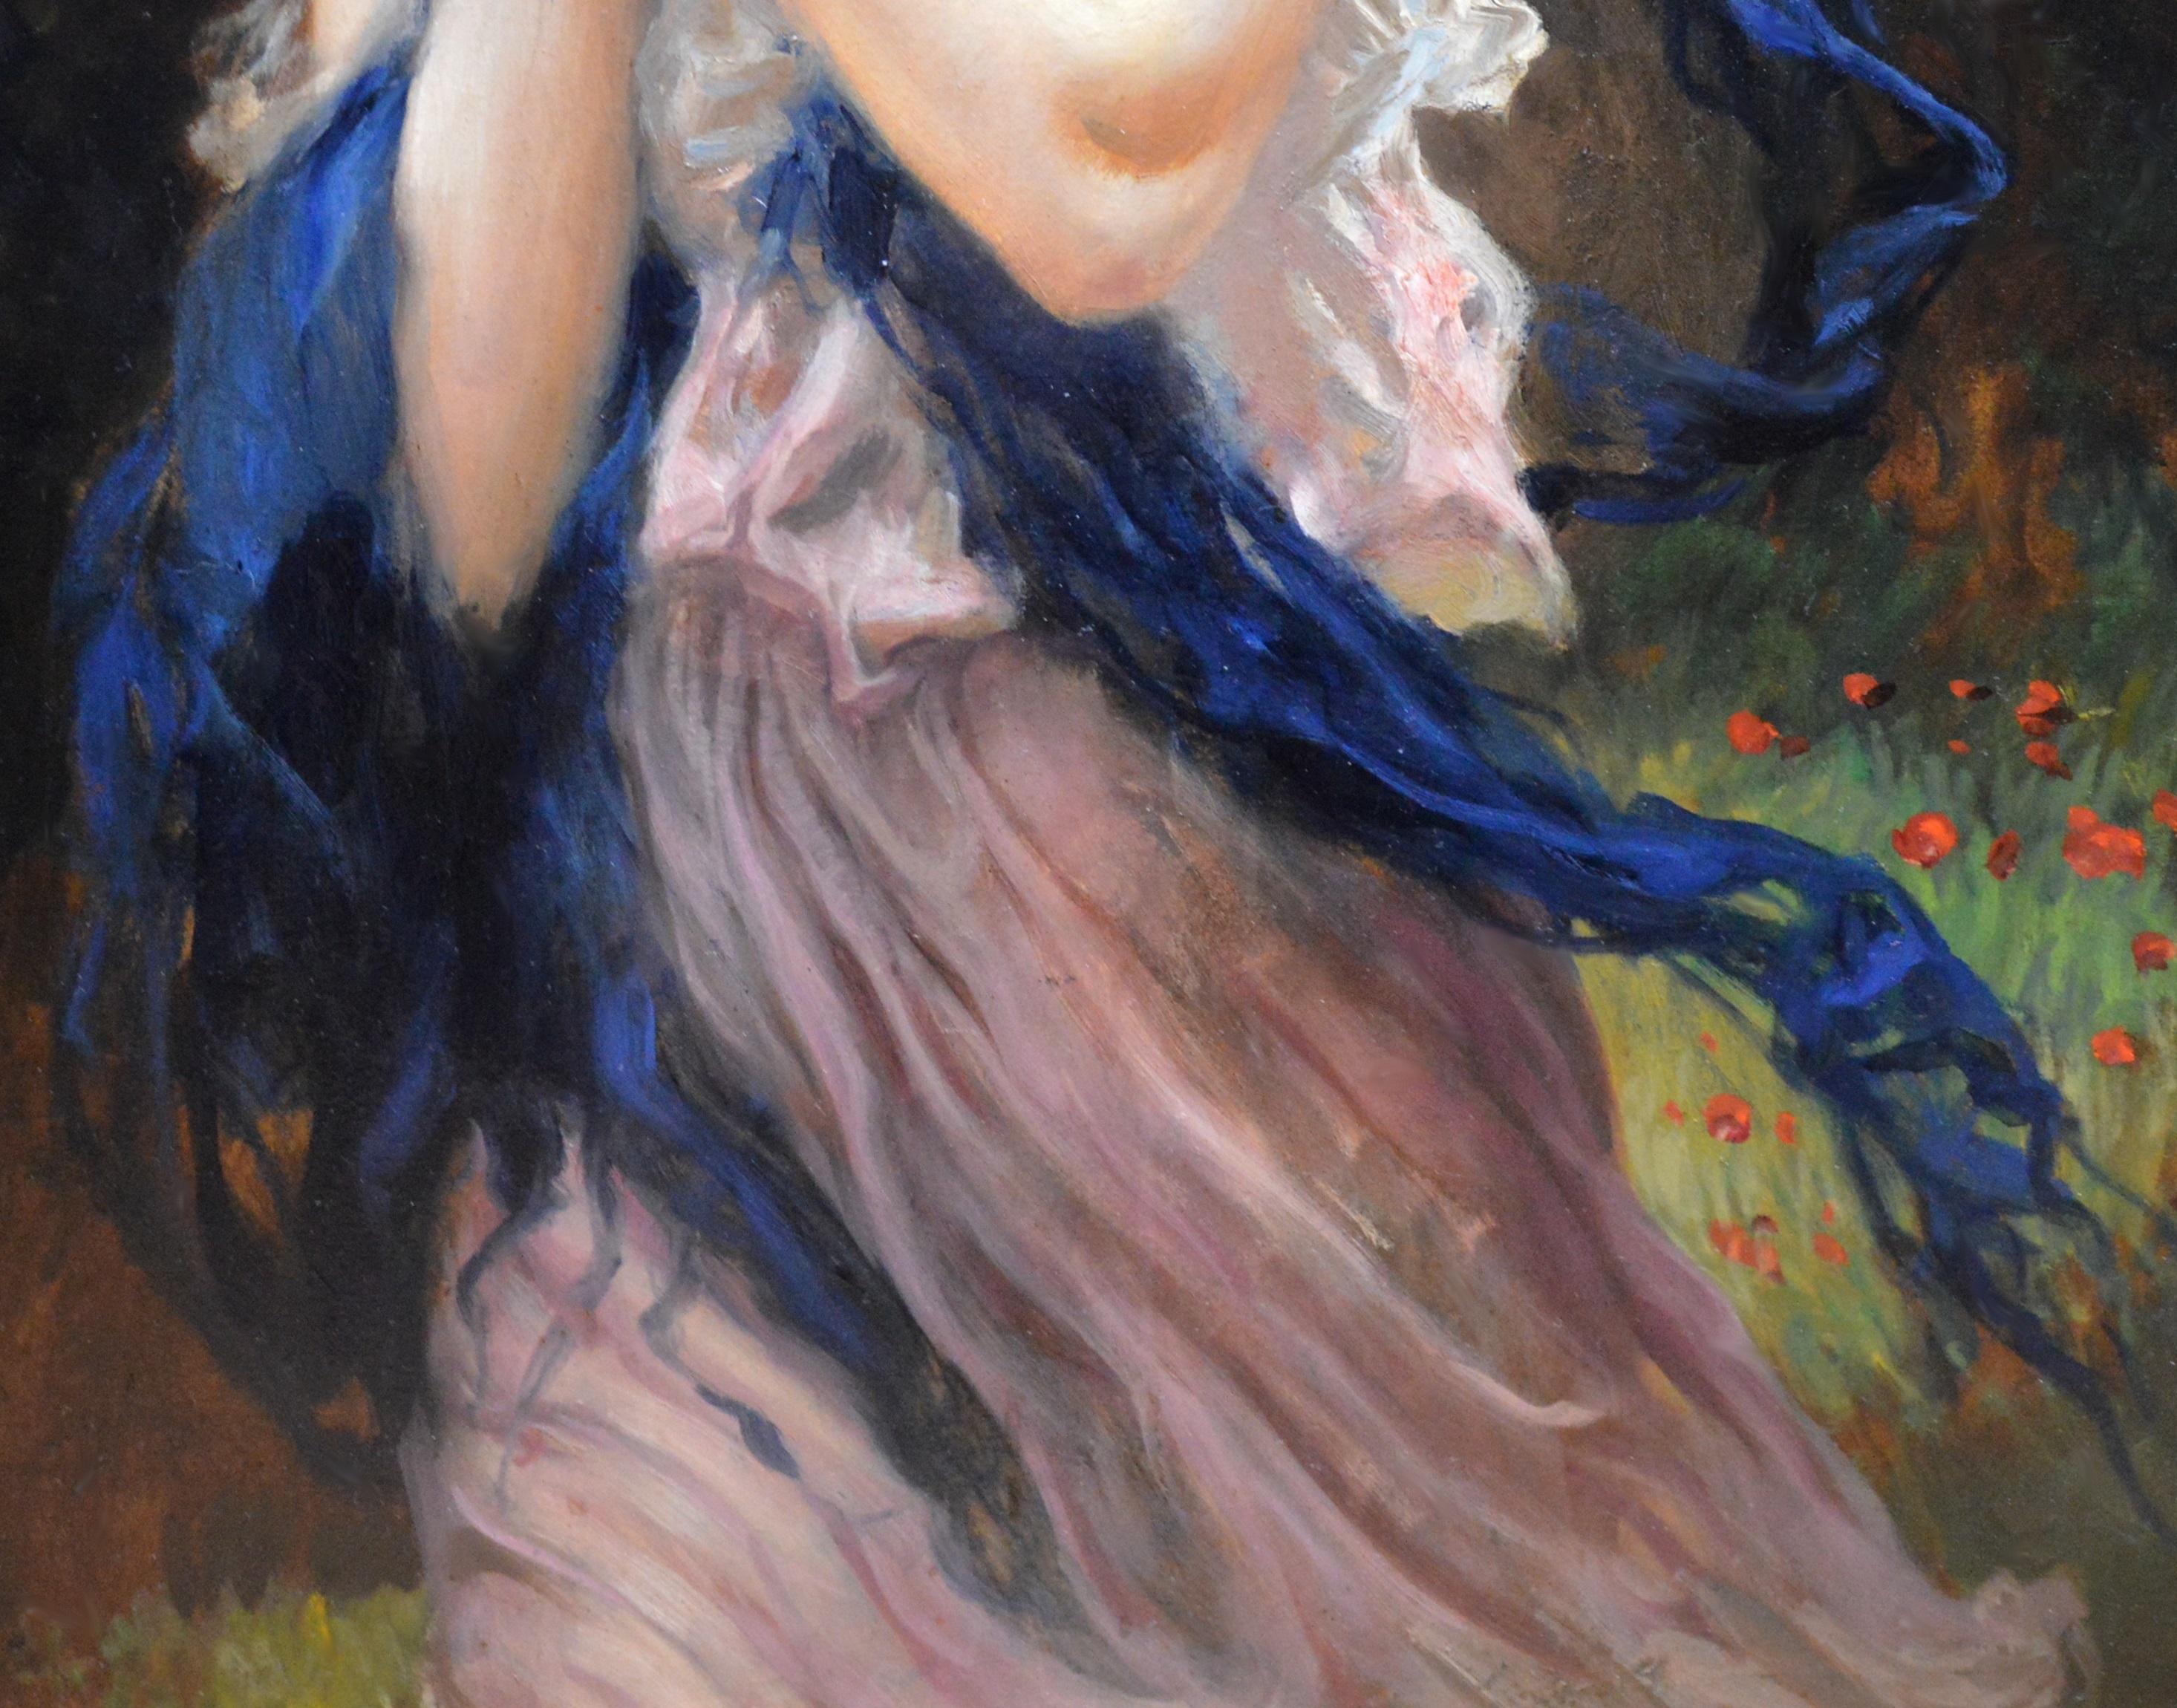 A large fine 19th century oil painting depicting the famous German actress Lili Marberg as a dryad draped in diaphanous fabrics by the eminent Bohemian painter Leopold Schmutzler (1864-1940). ‘The Wood Nymph’ is signed by the artist and presented in